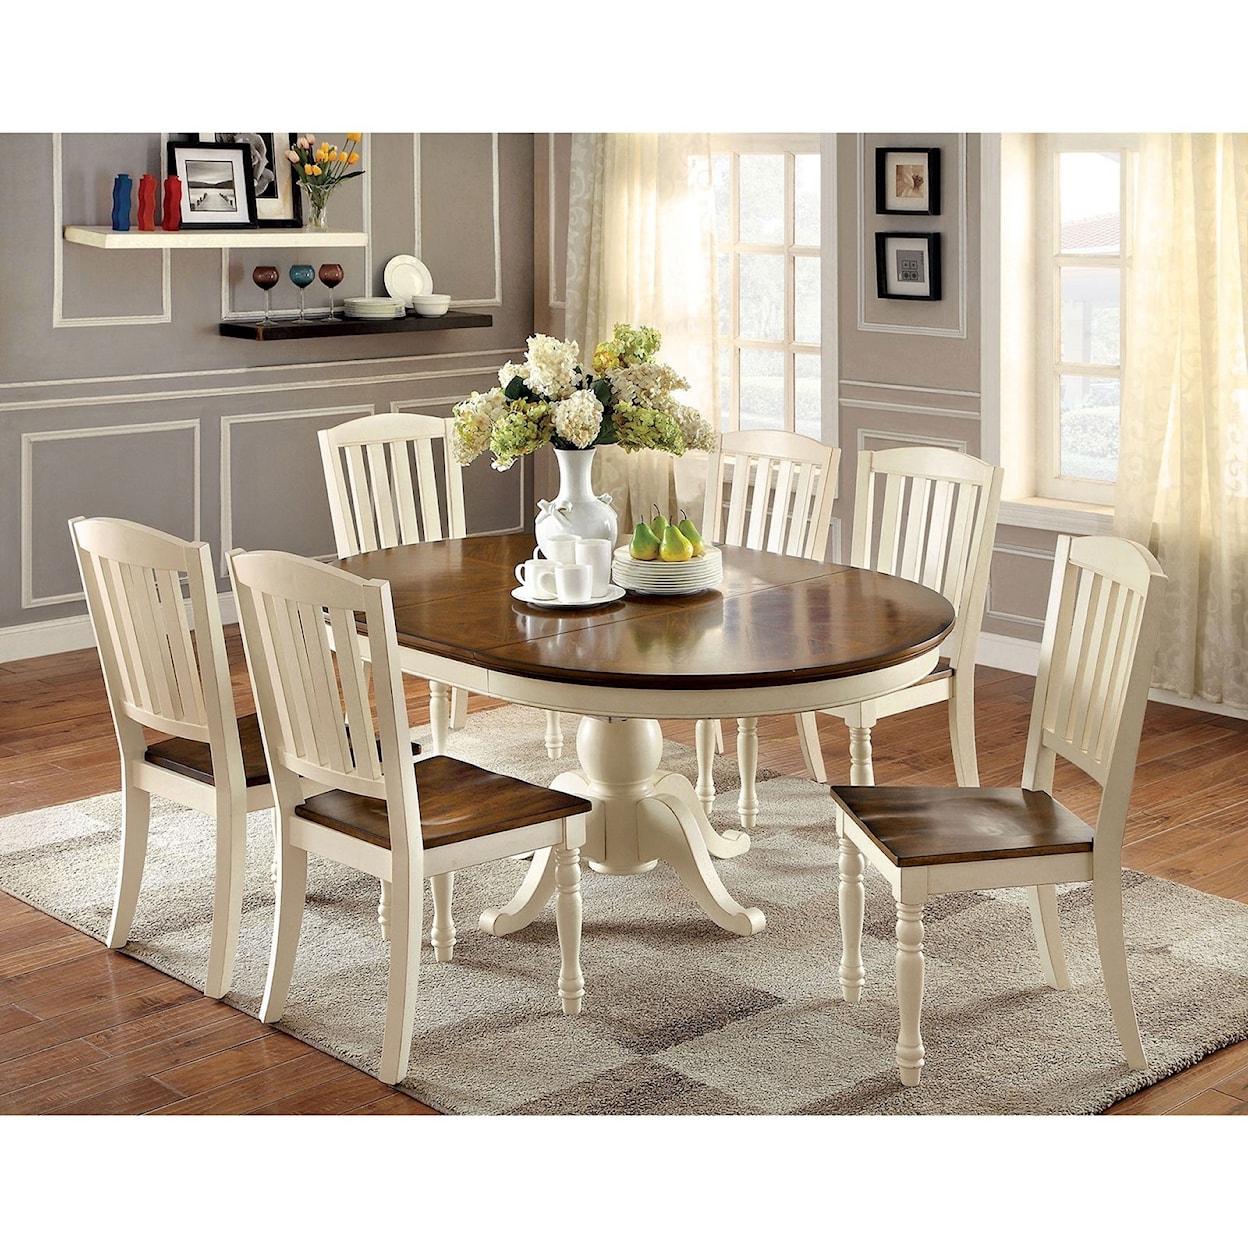 Furniture of America Harrisburg Oval Dining Table 